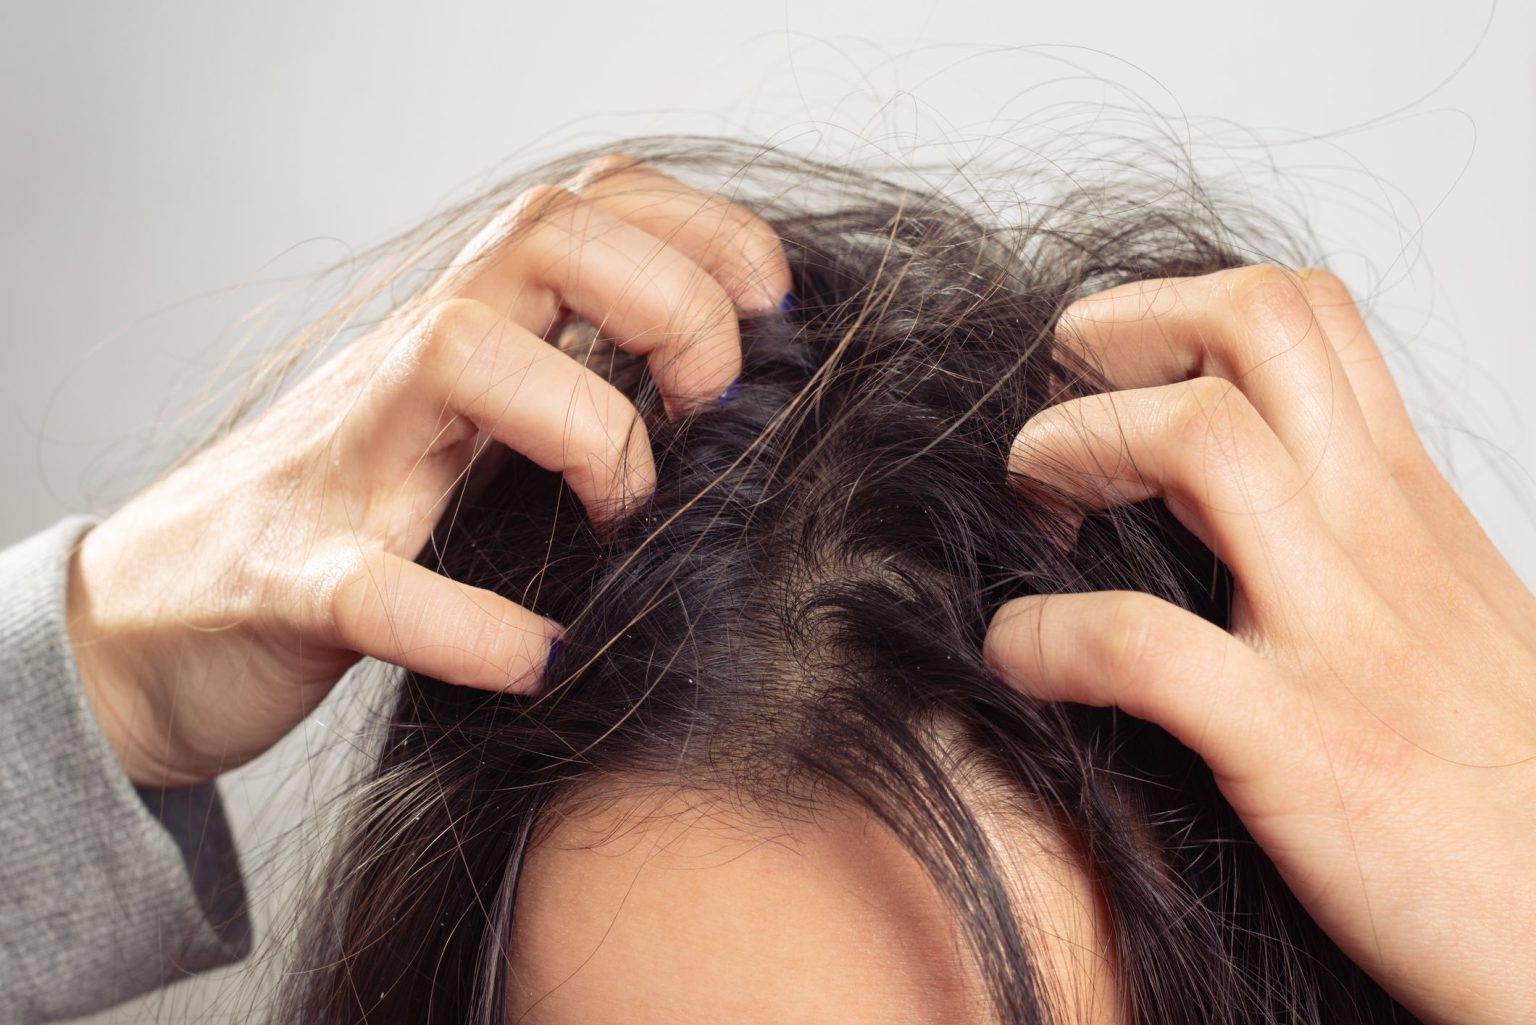 hair dandruff causing itching and scratching